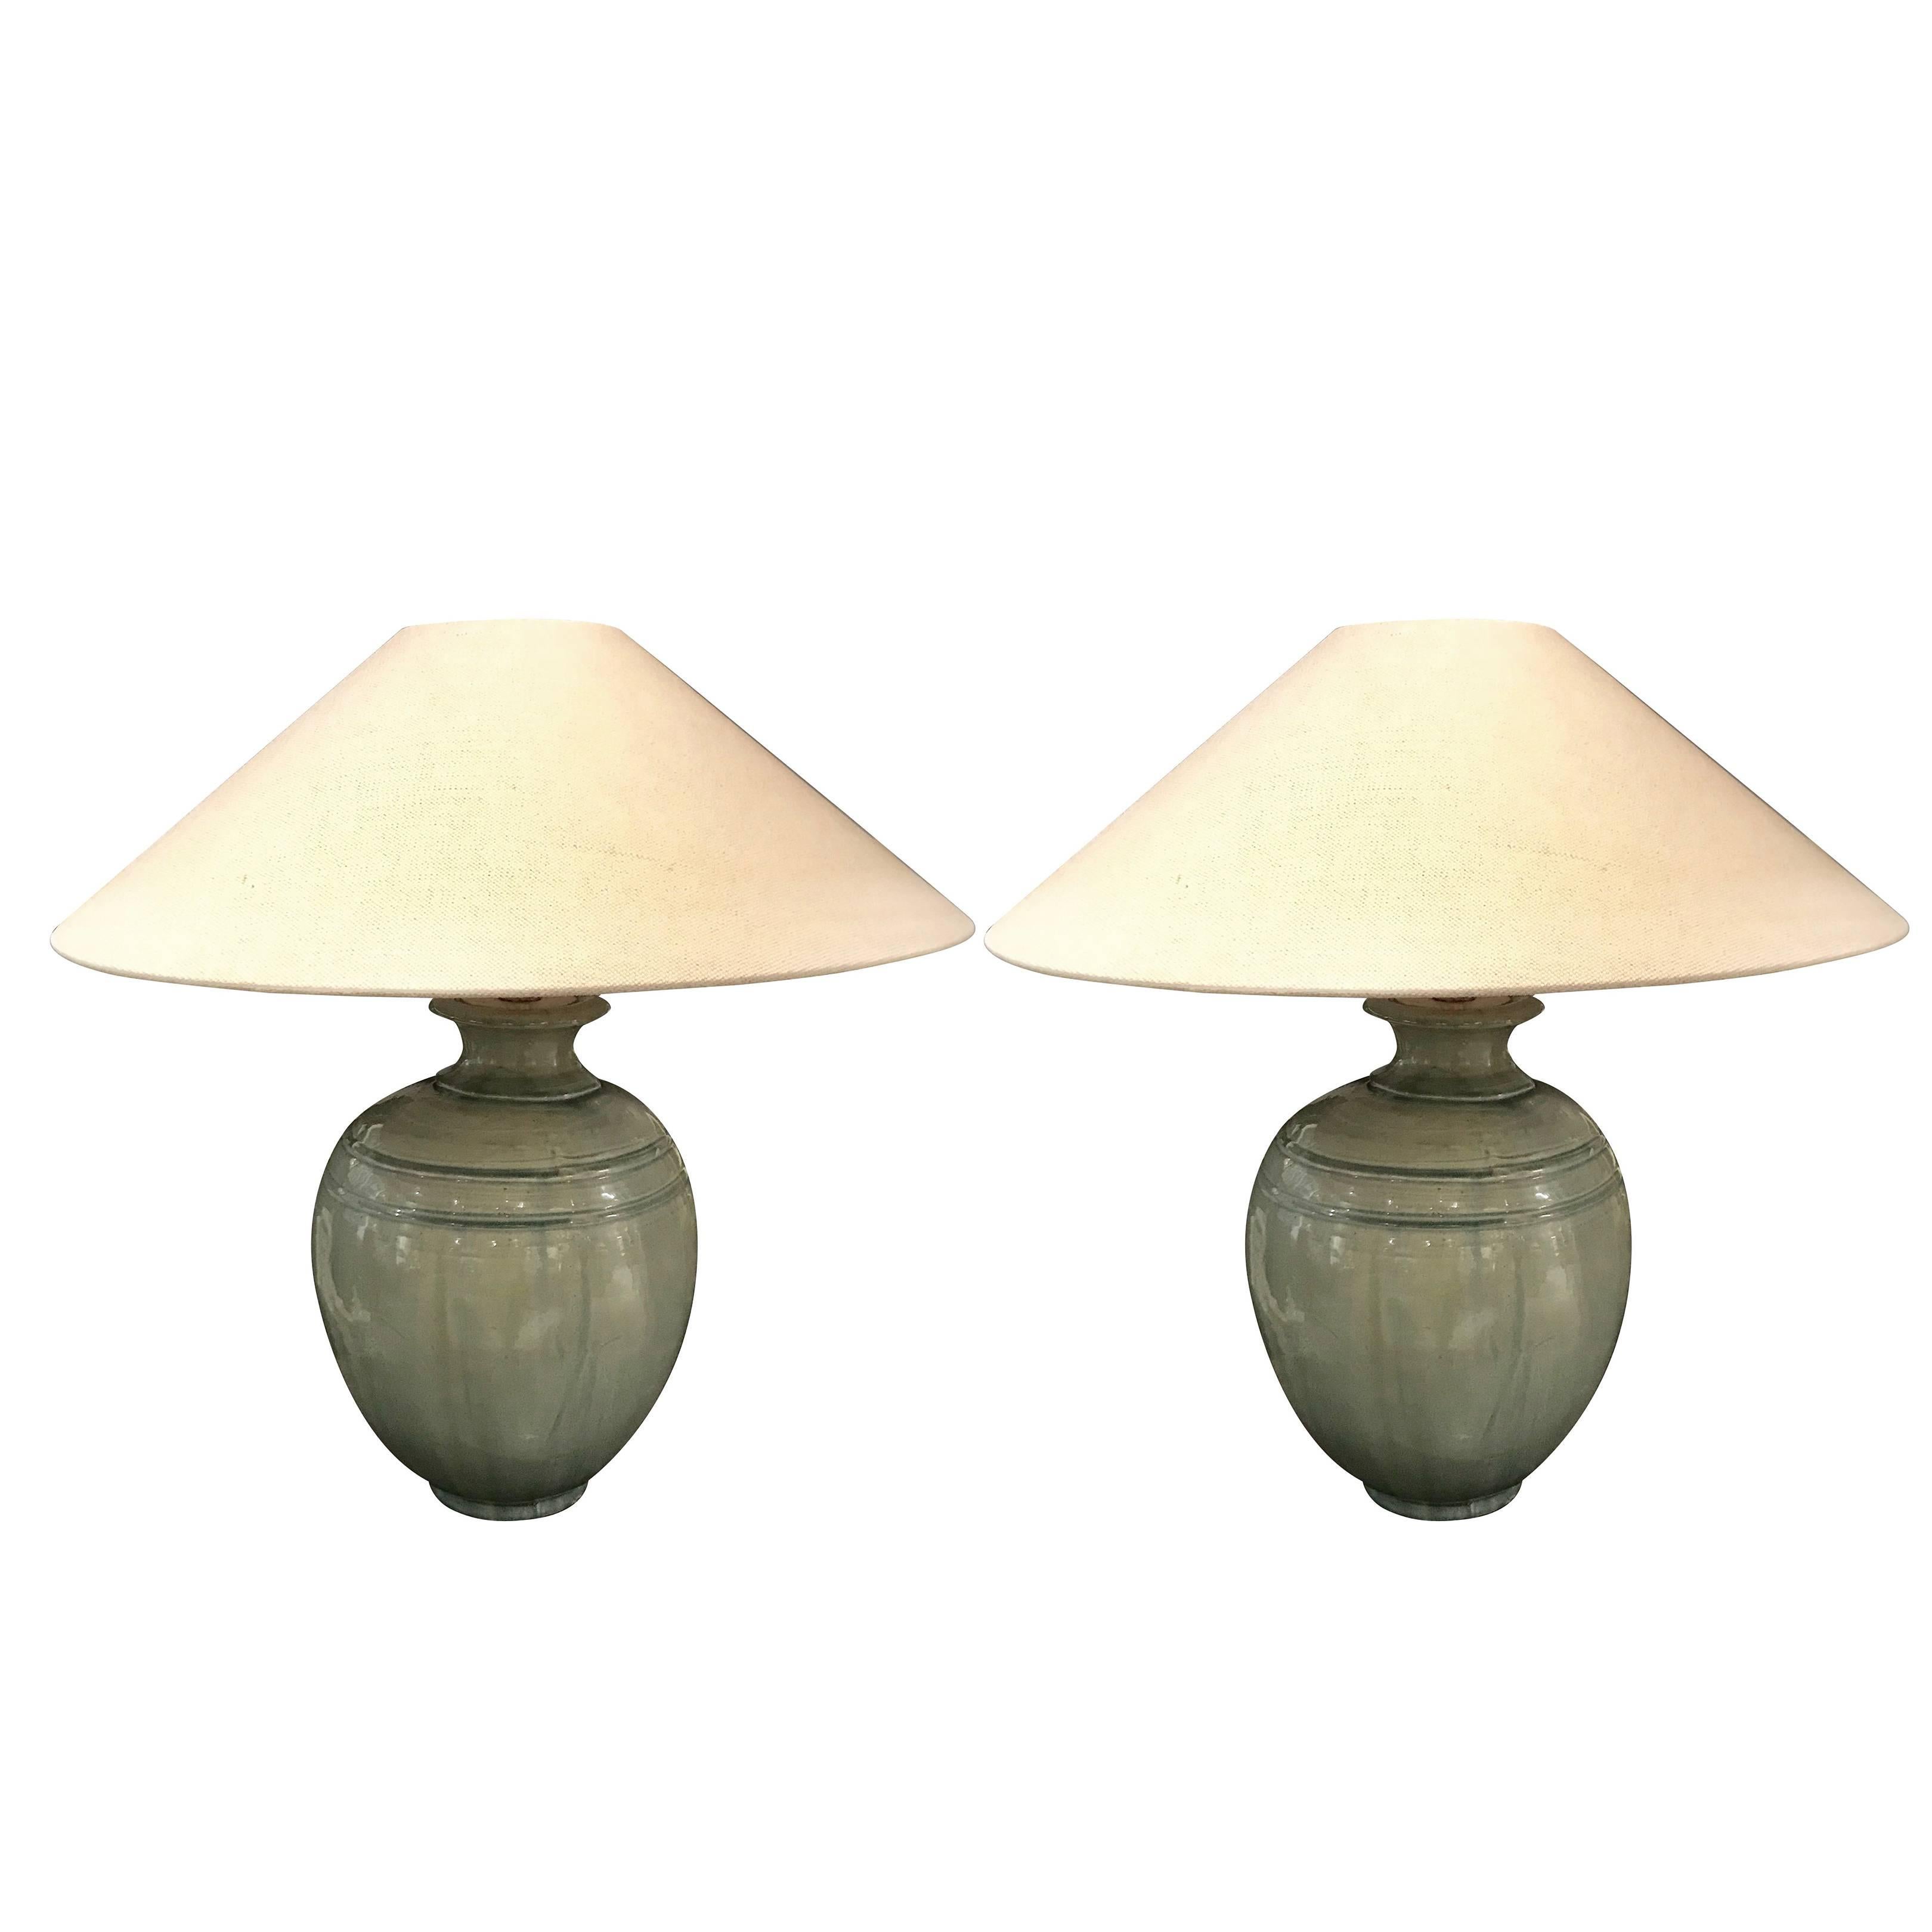 Pair of Washed Turquoise Lamps, China, Contemporary